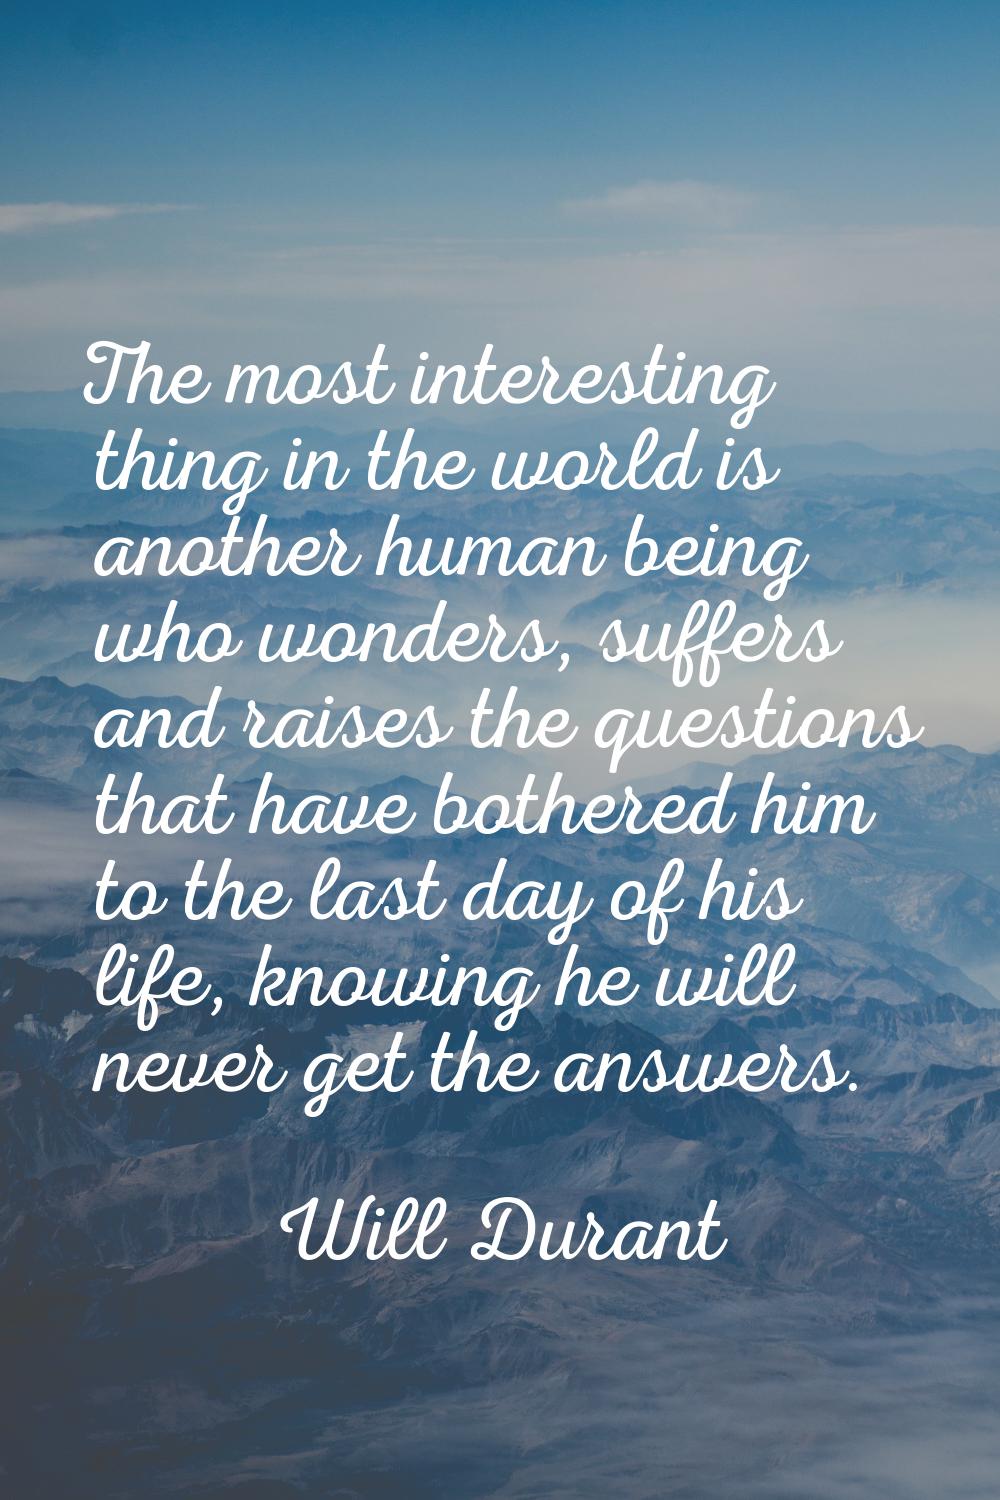 The most interesting thing in the world is another human being who wonders, suffers and raises the 